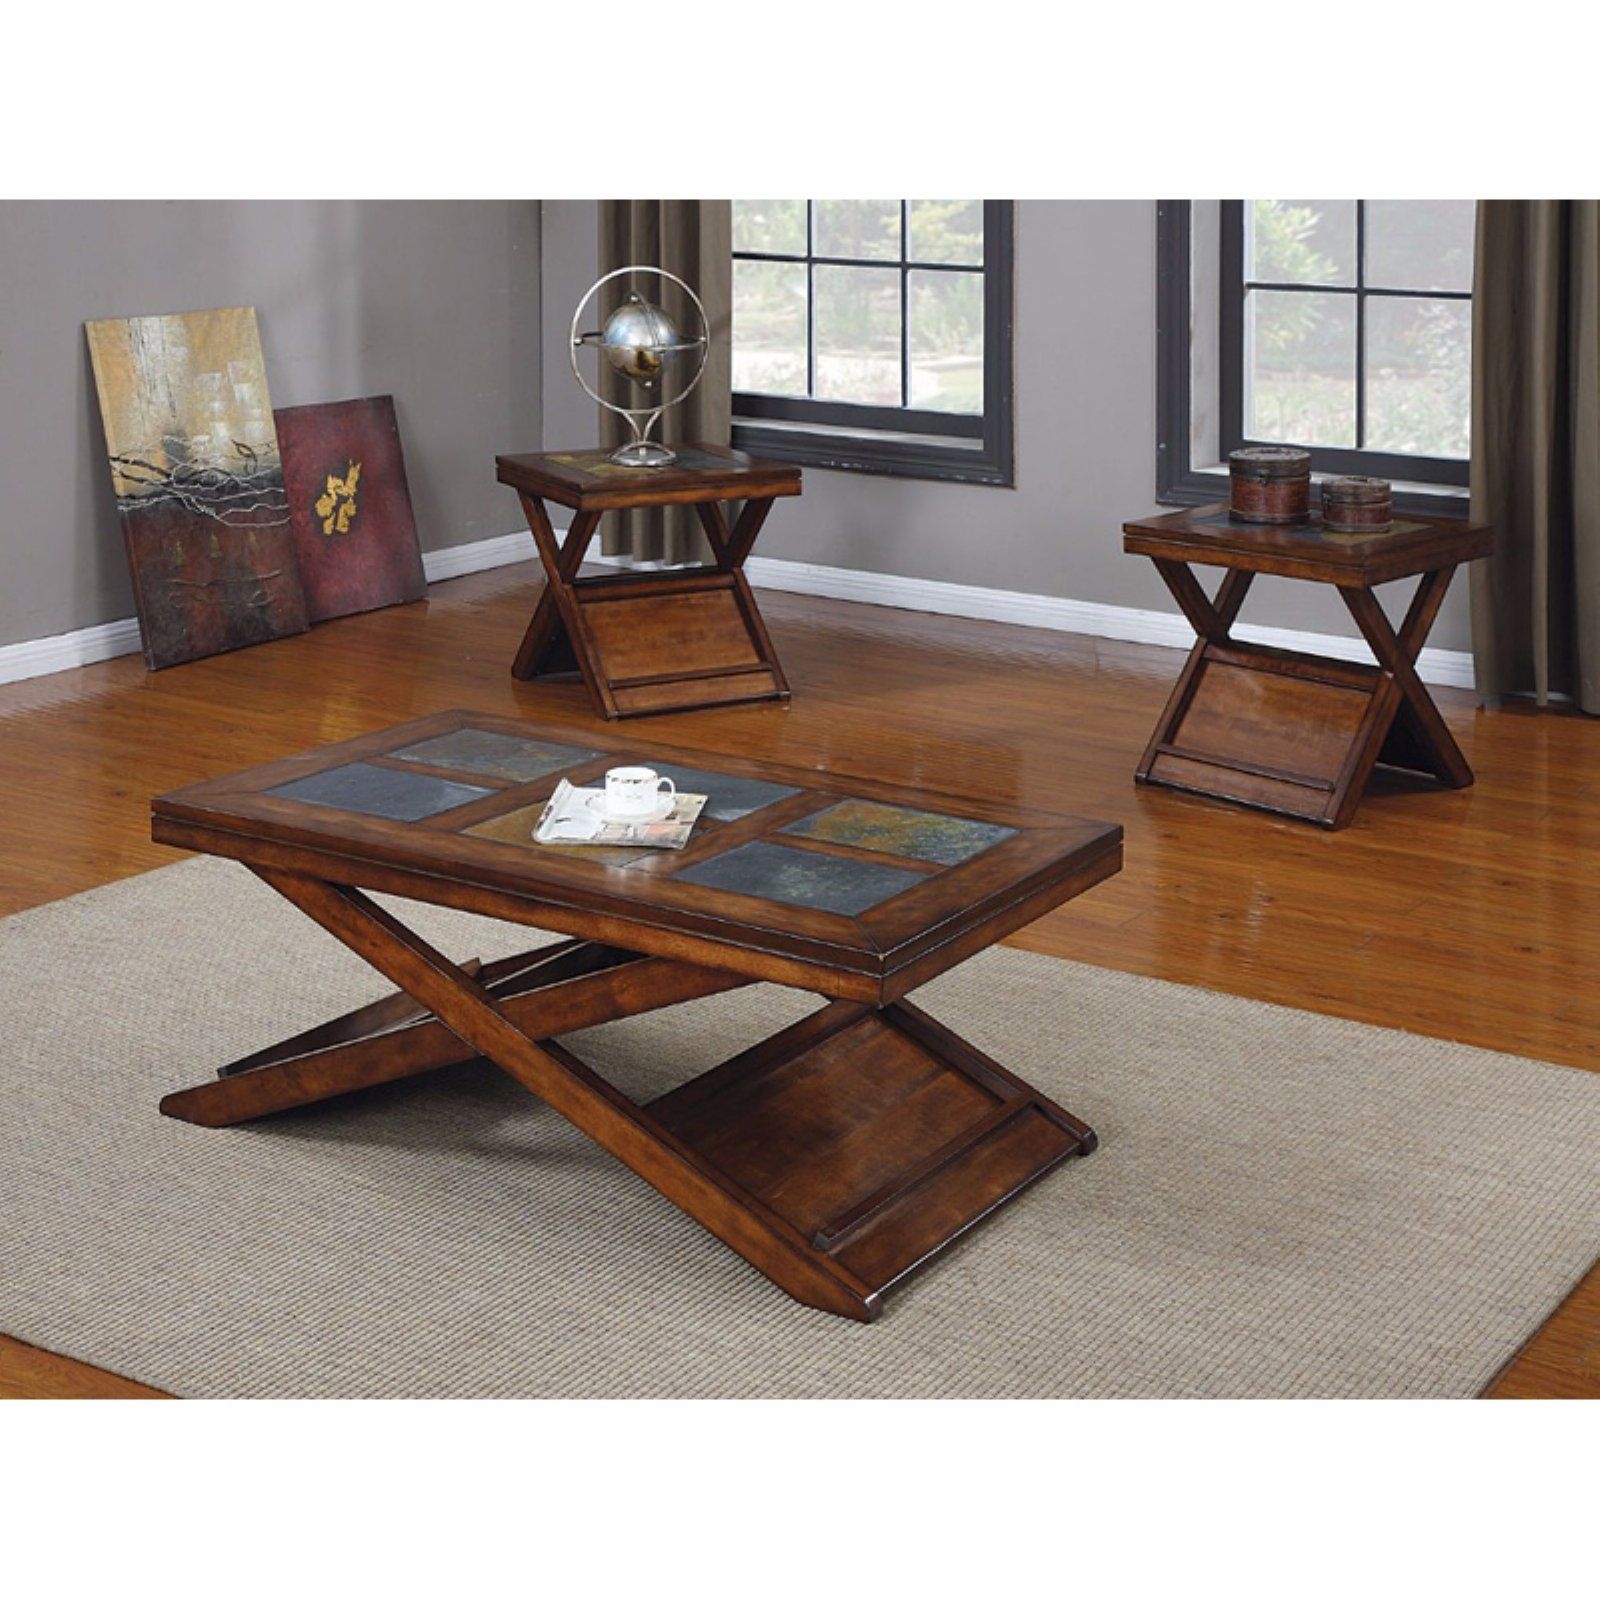 3 Piece Coffee Table Sets - Bed Bath & Beyond